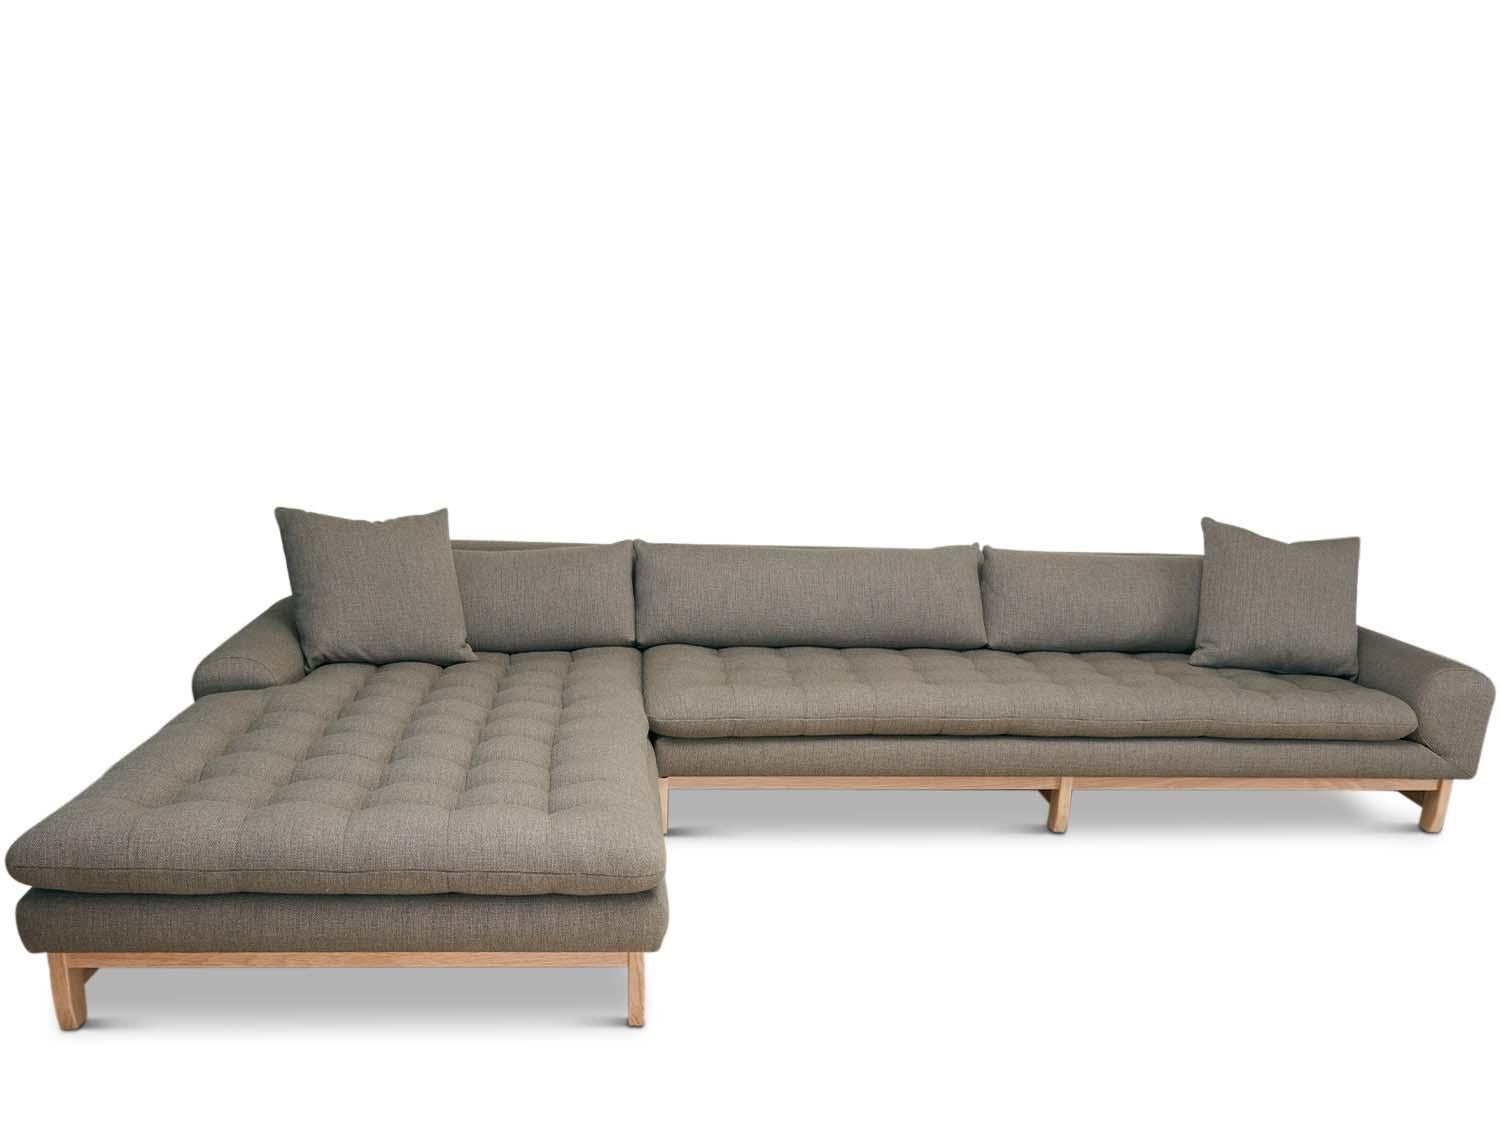 The Morro Sectional is our deepest and largest scaled sectional featuring a biscuit tufted seat, loose back cushions and a geometrically sculpted base. Available in two sizes, standard and XL. Also available as a sofa.

The Lawson-Fenning